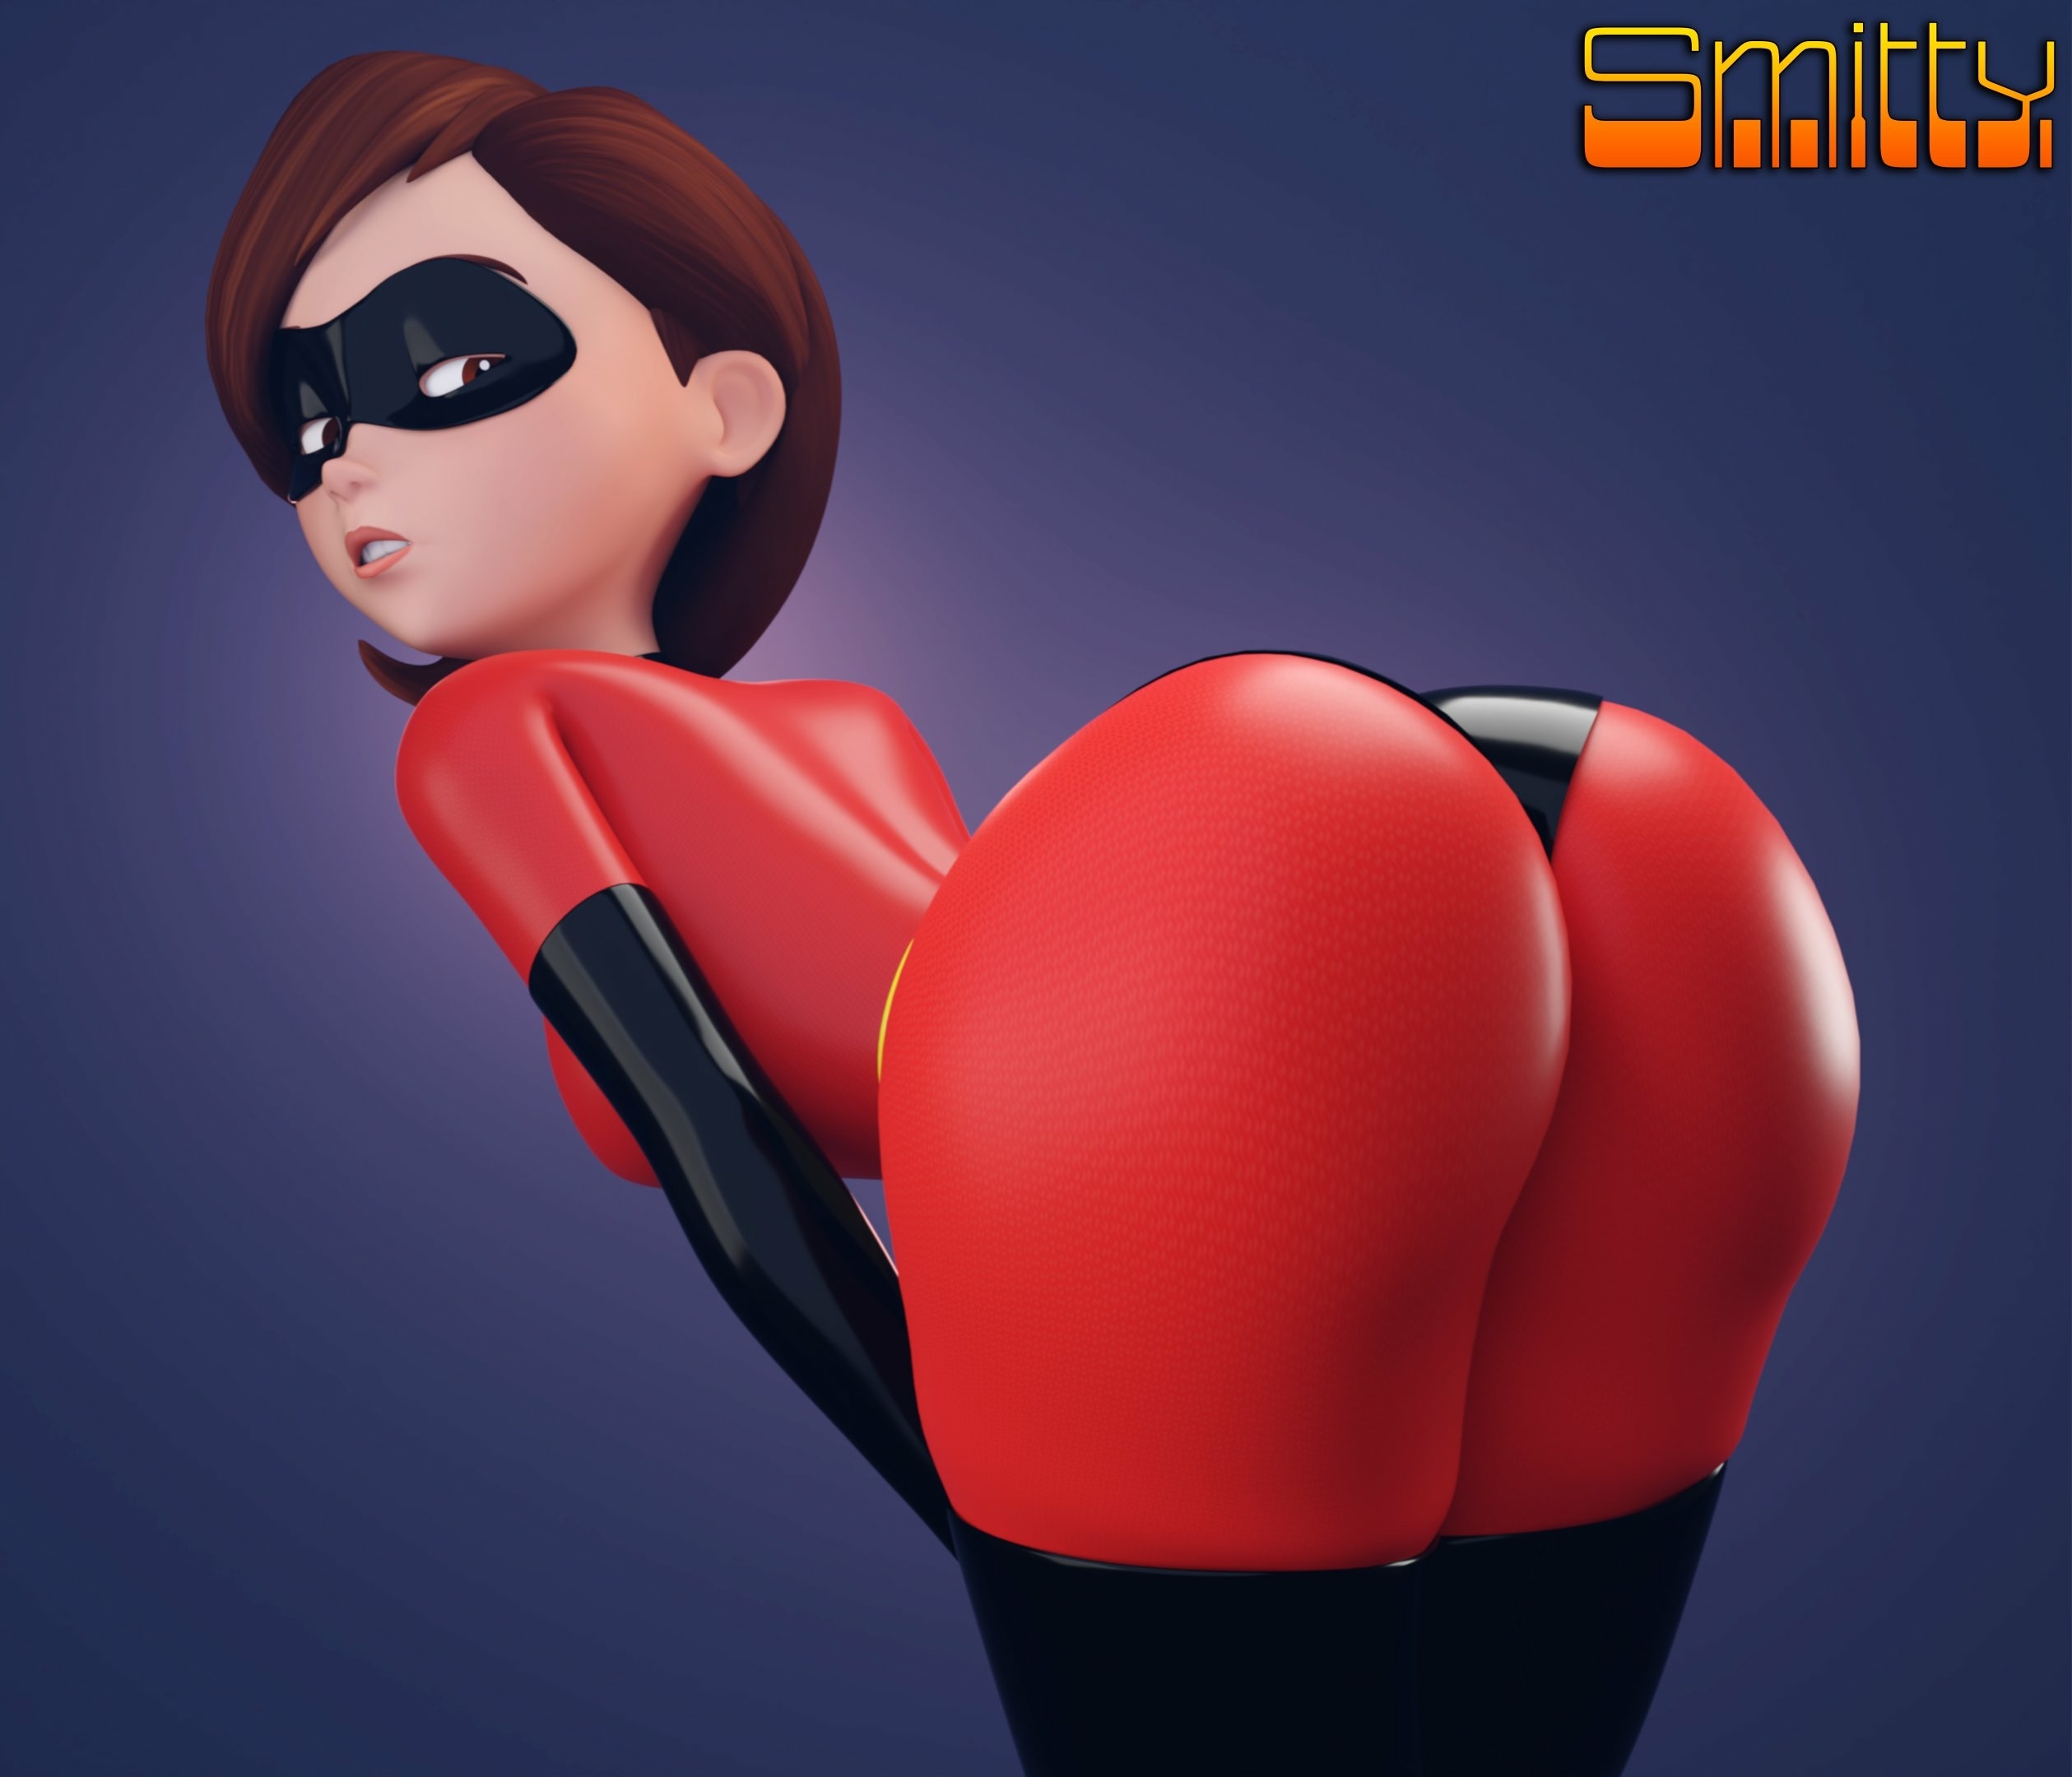 Helen s fat booty making me act unwise. Elastigirl The Incredibles Cake Boobs Big boobs Ass Big Ass Big Tits Horny Face Horny Sexy 3d Porn